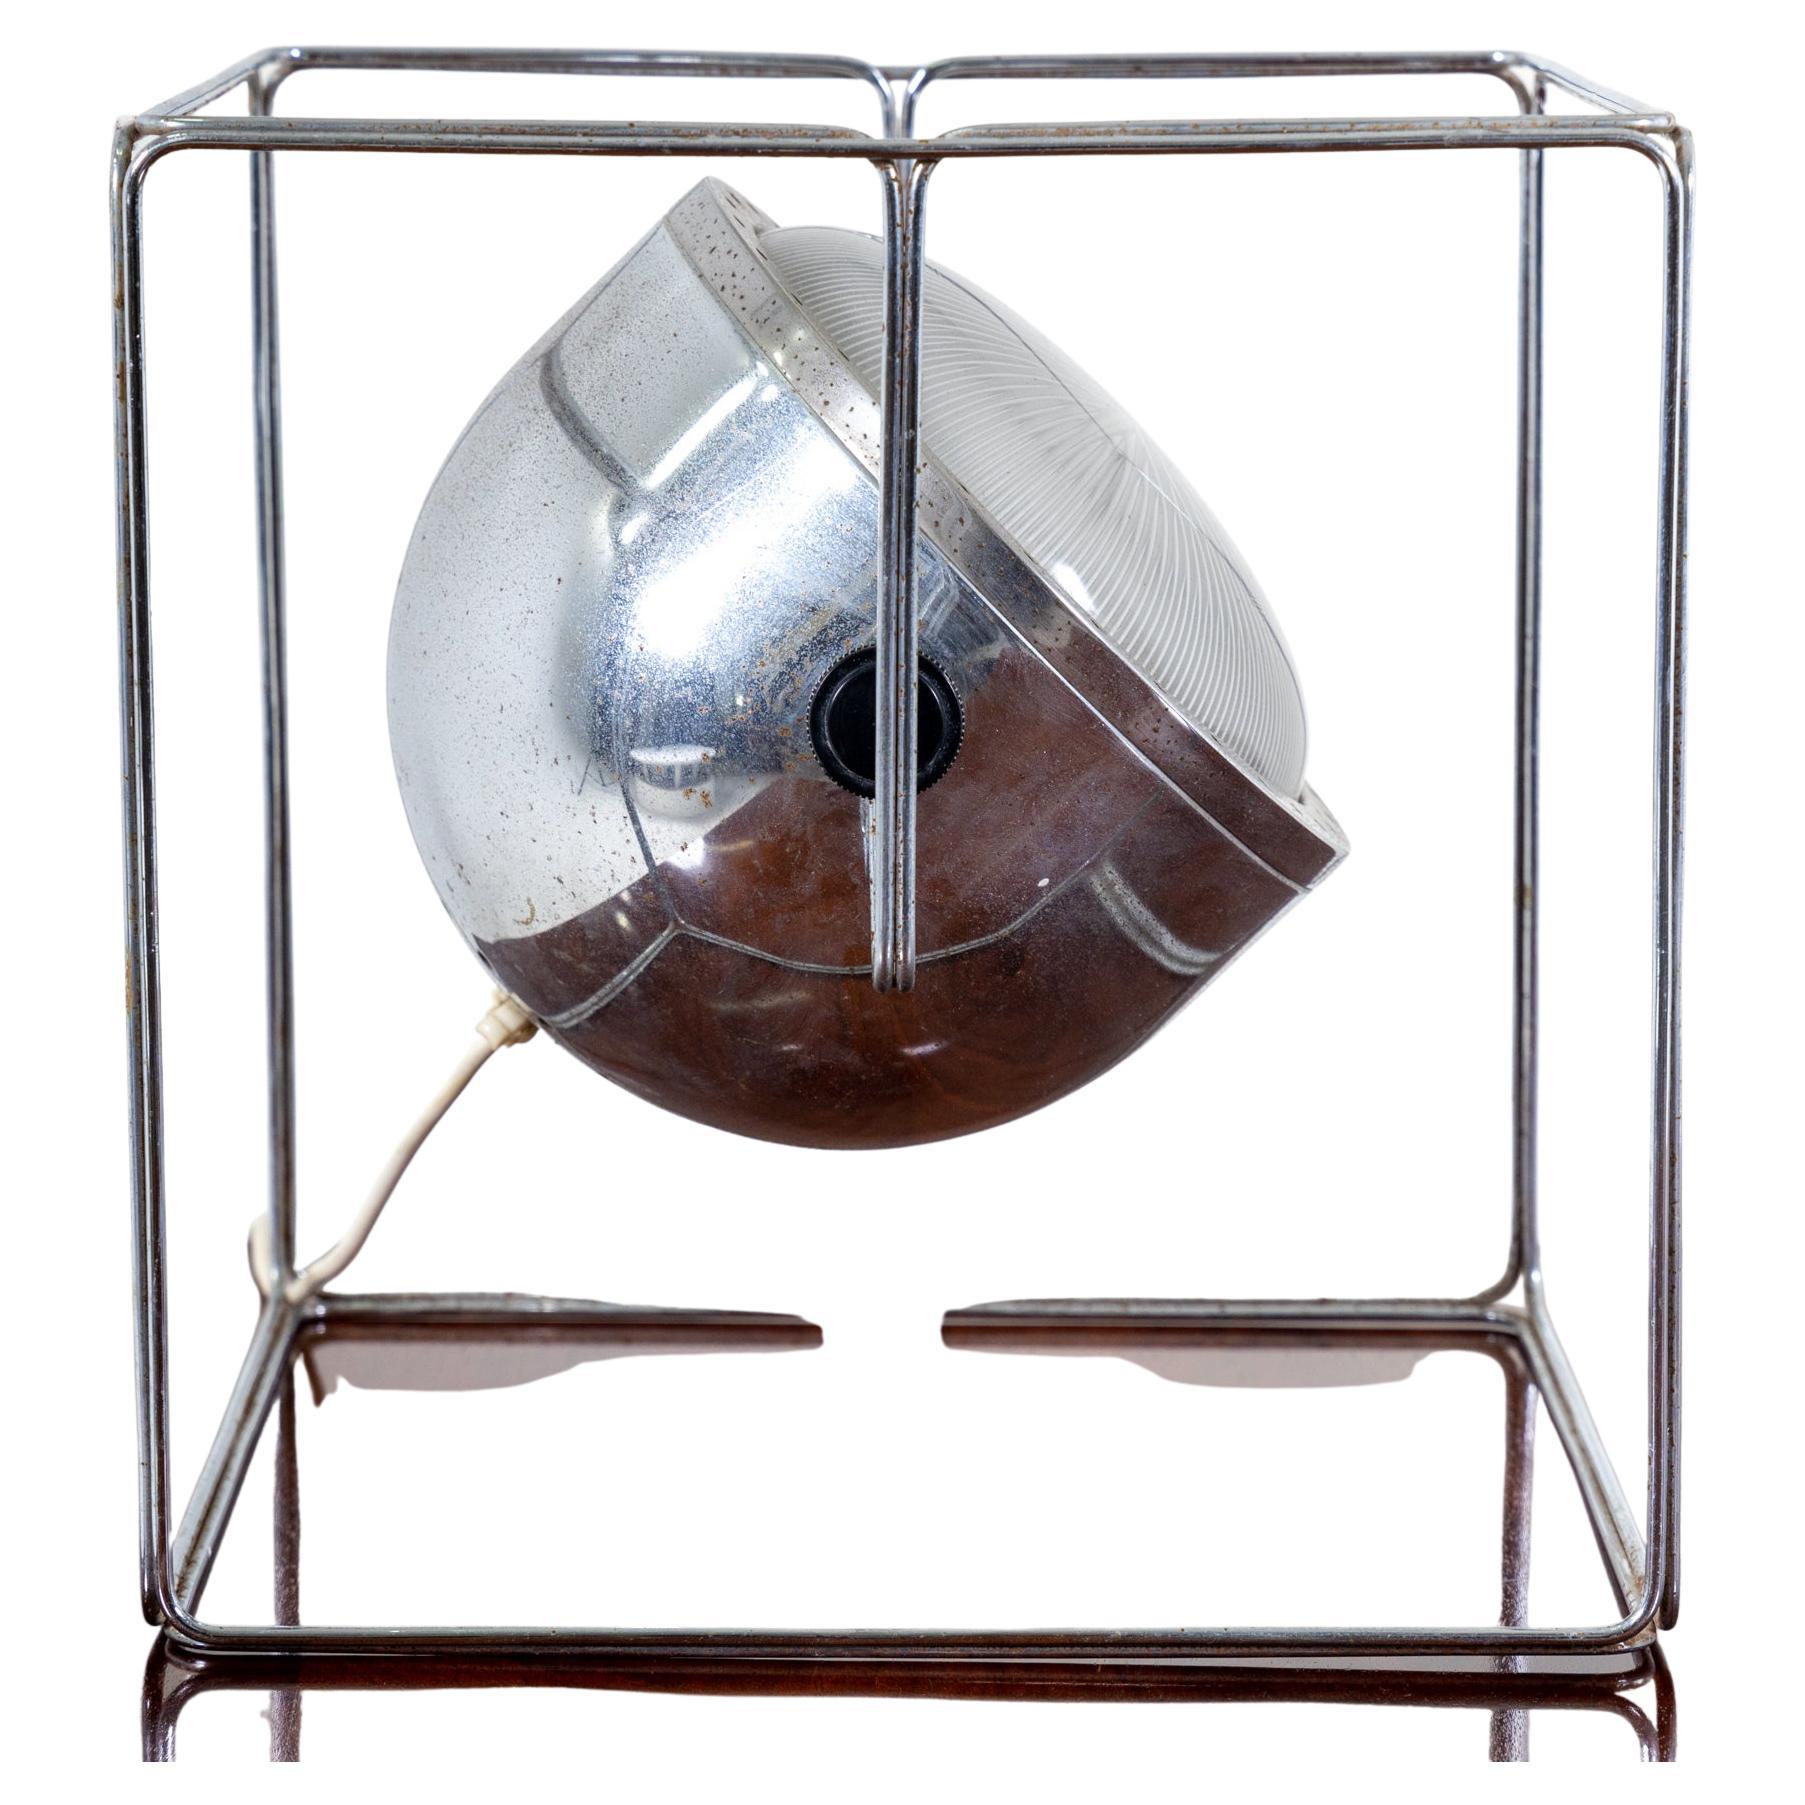 Table lamp with cubic chromed metal frame and spotlight-shaped adjustable lampshade.